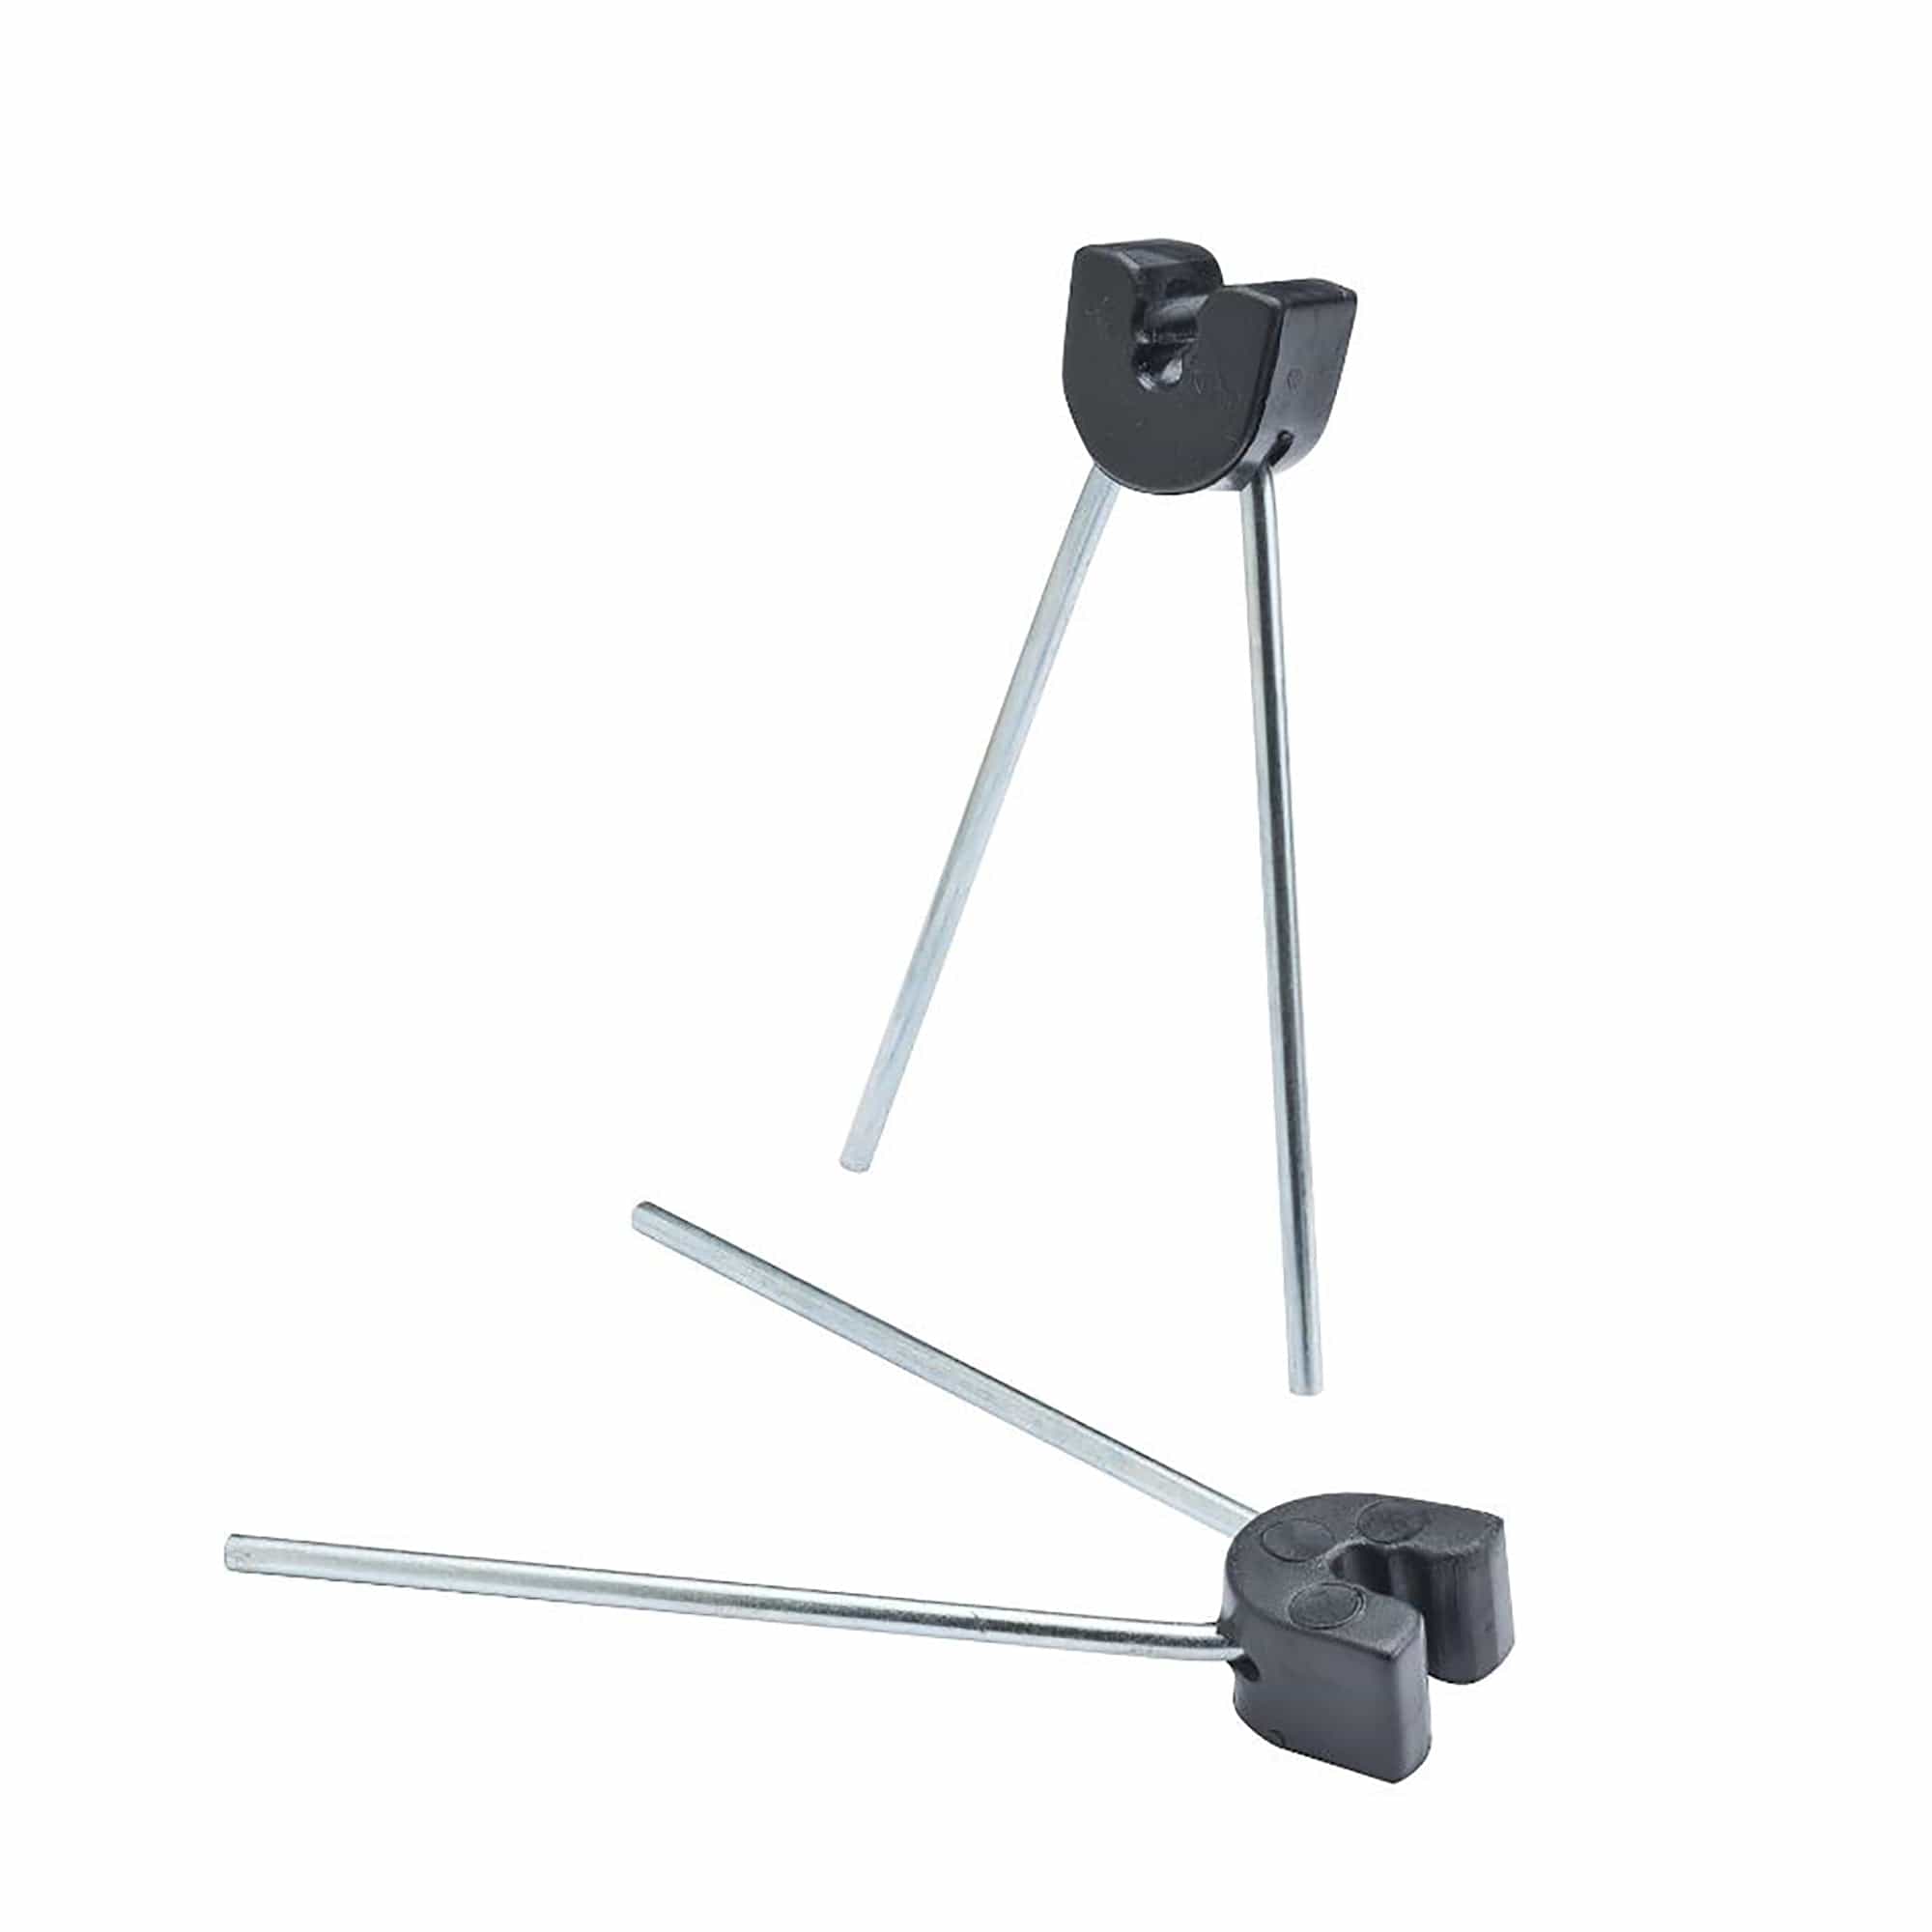 Celsius IRS-1 Ice Fishing Rod Stands, Pack of 2